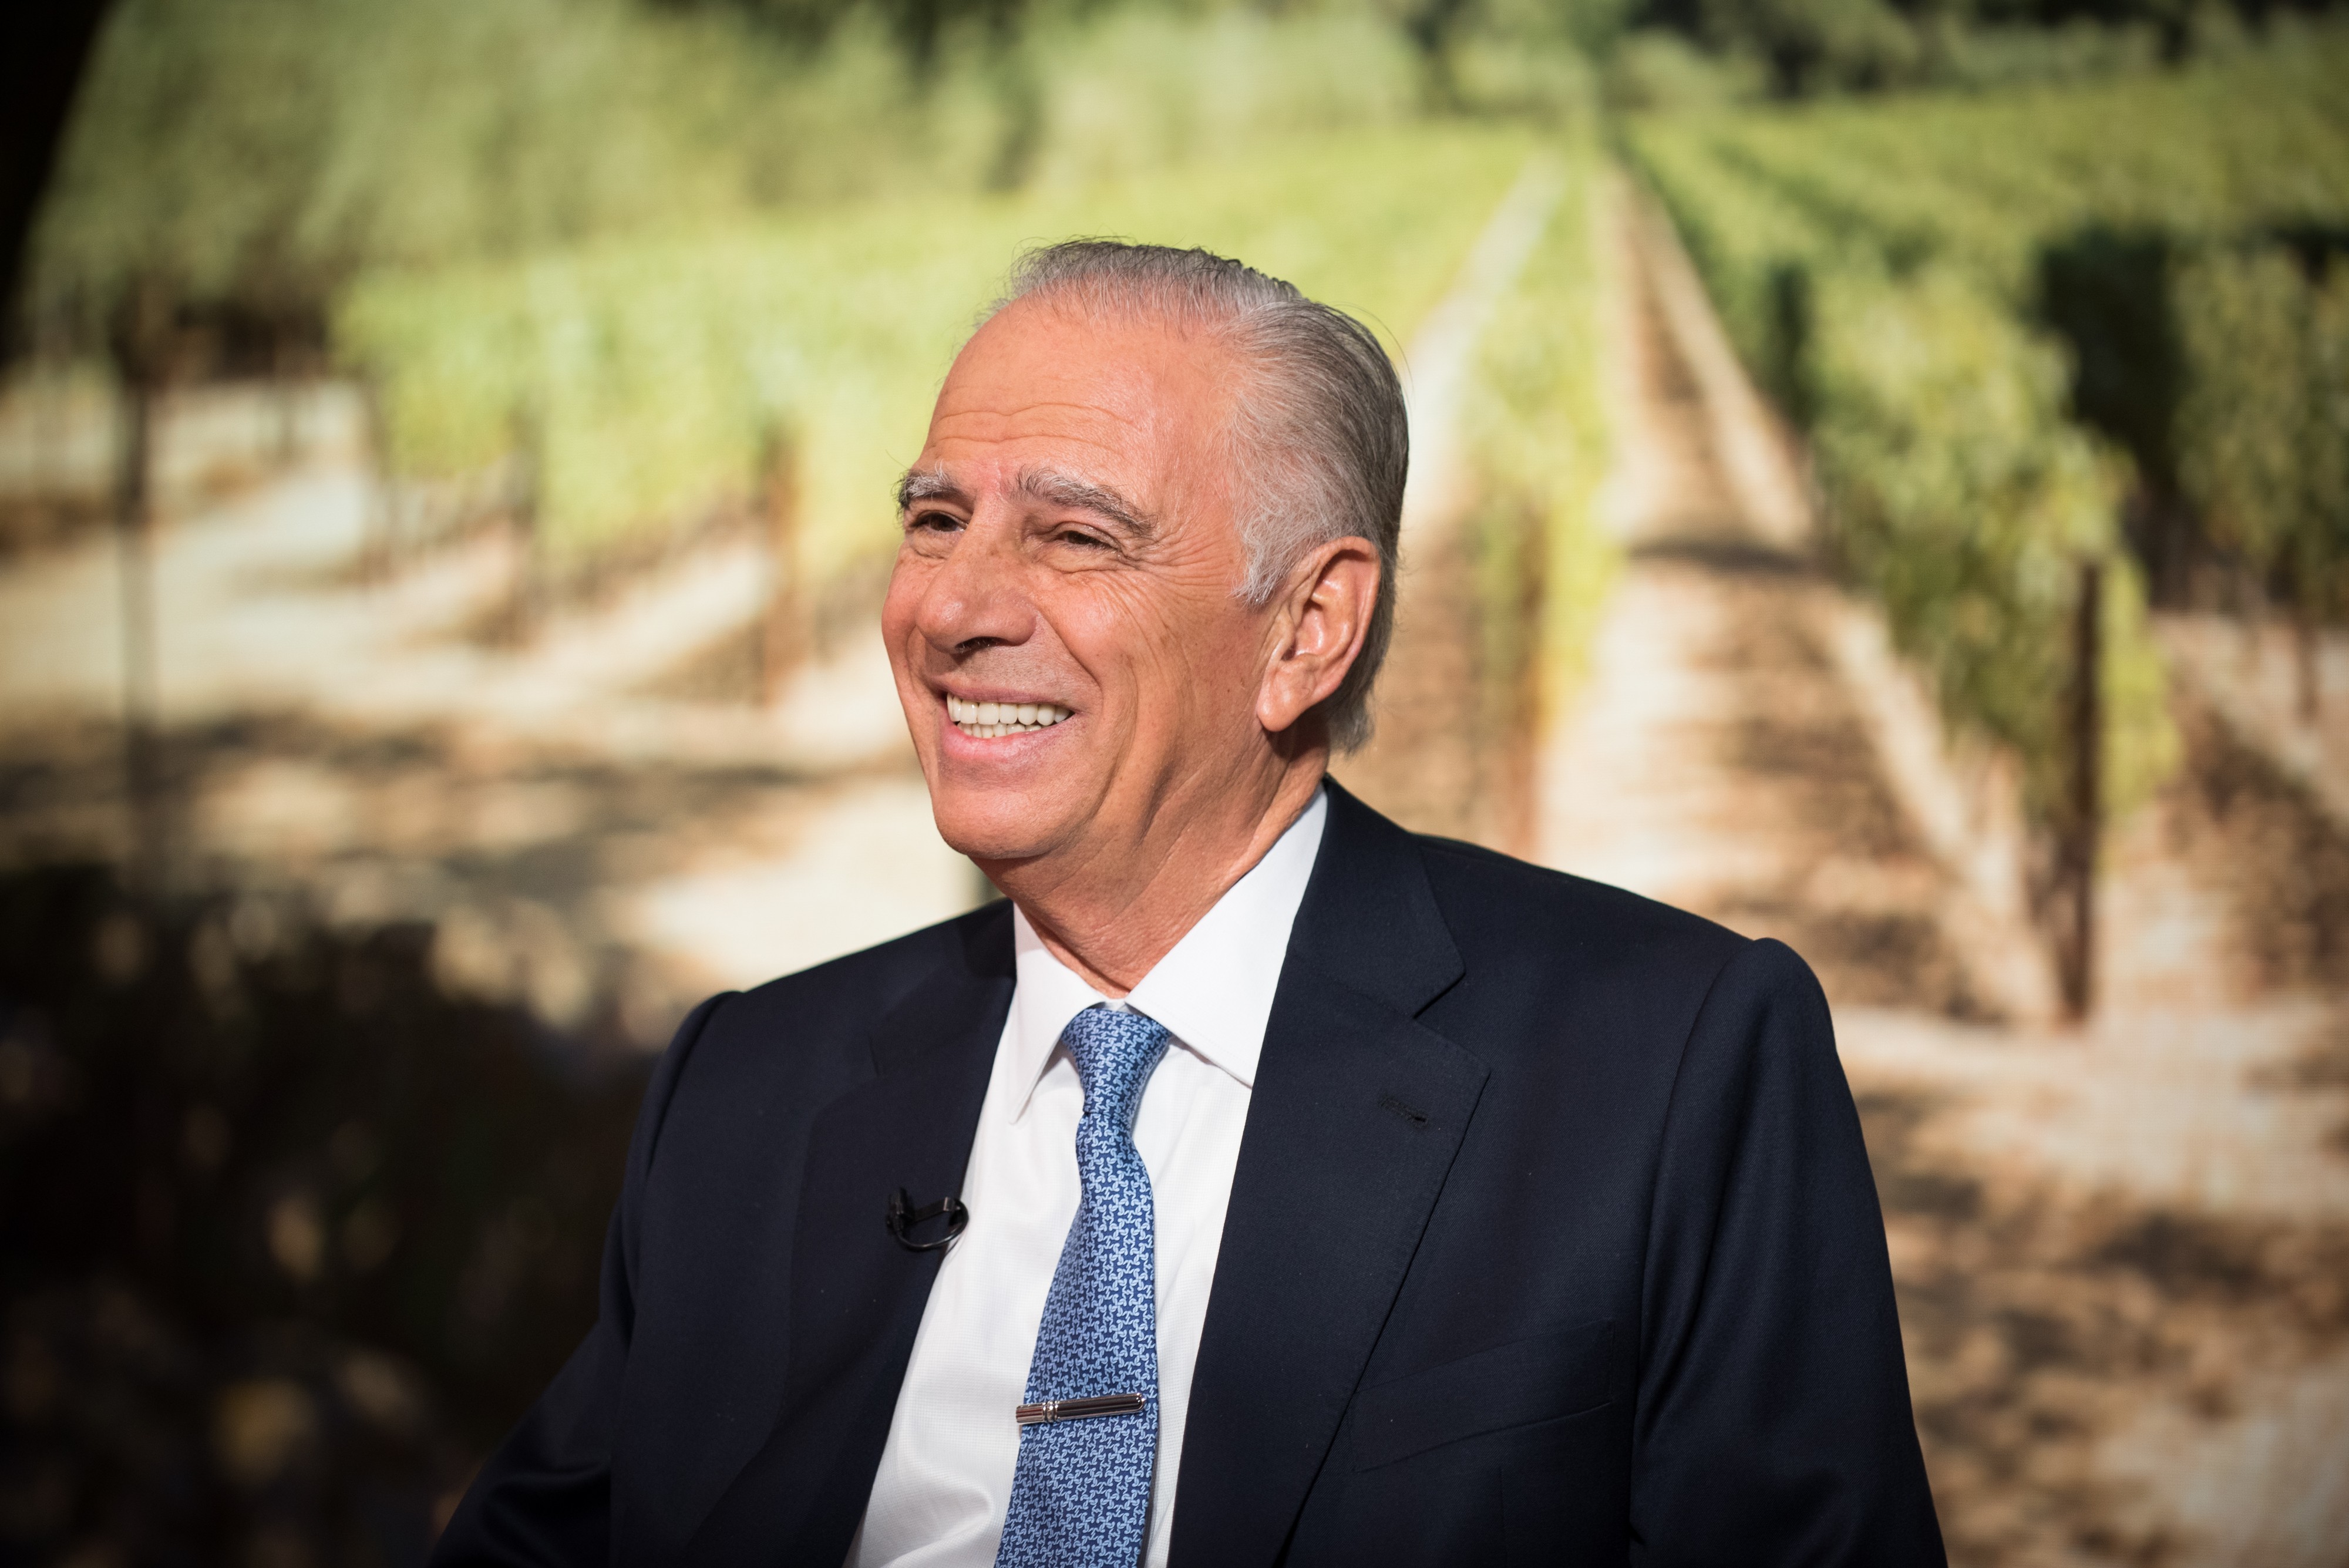 Alejandro Bulgheroni, president and chairman of oil and gas company Bridas, owns wineries all over the world. Photo: Bloomberg